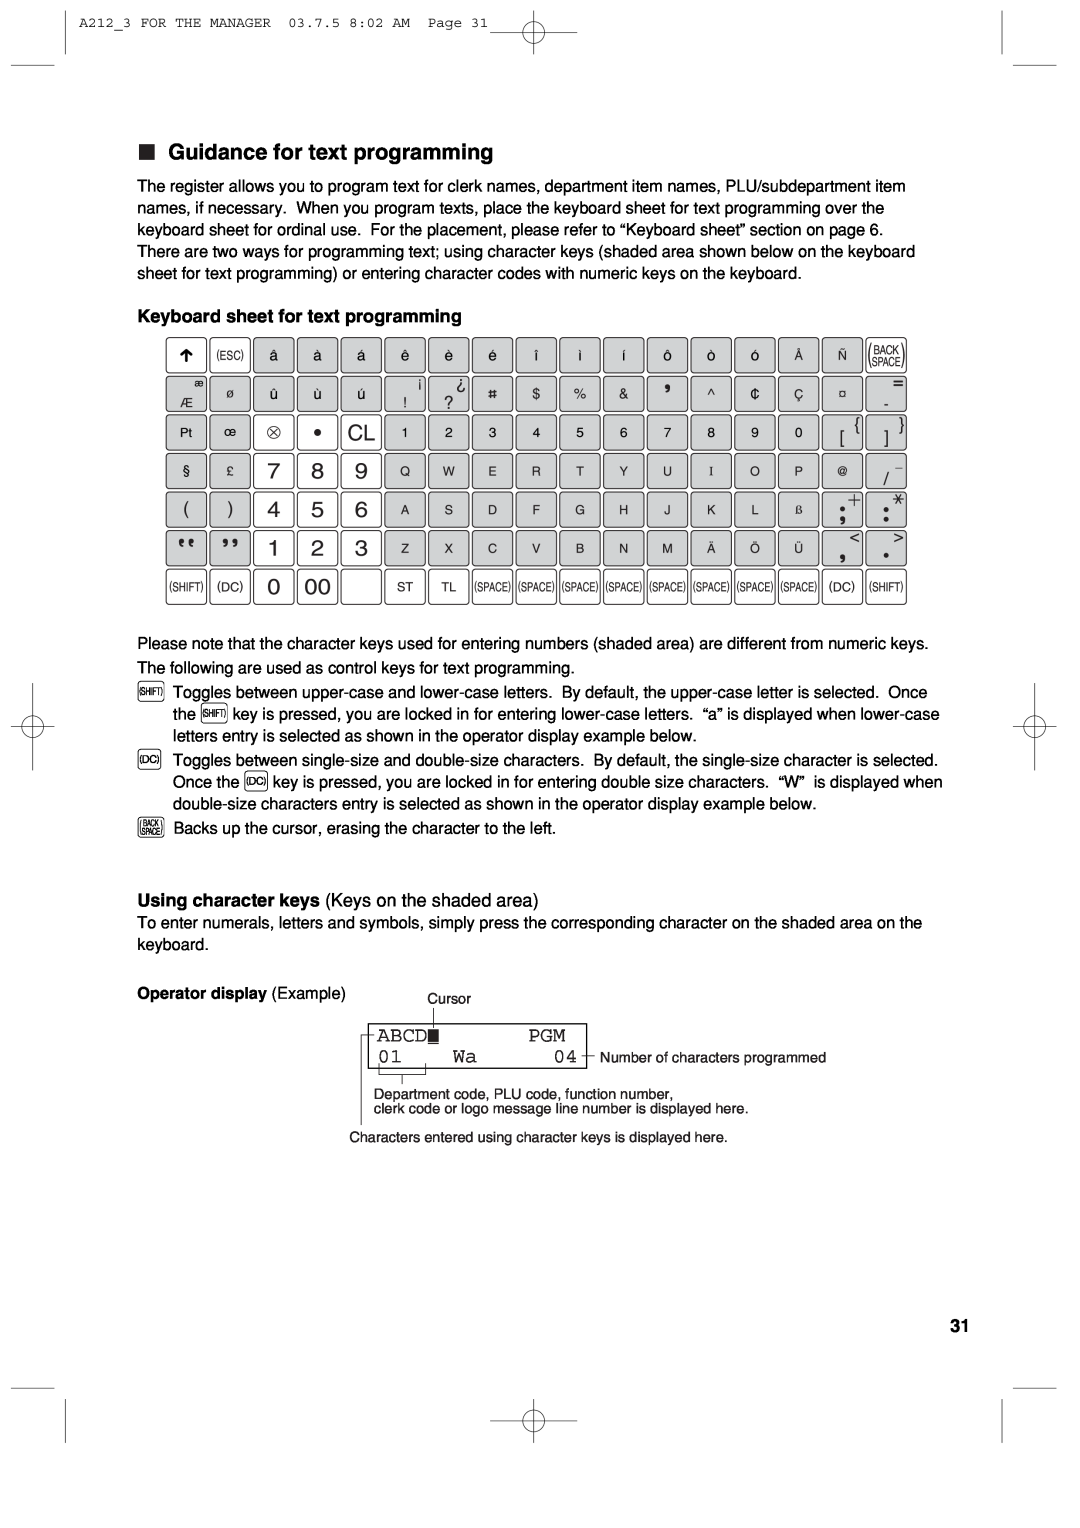 Sharp XE-A212 Guidance for text programming, Abcd, Keyboard sheet for text programming, Operator display Example 